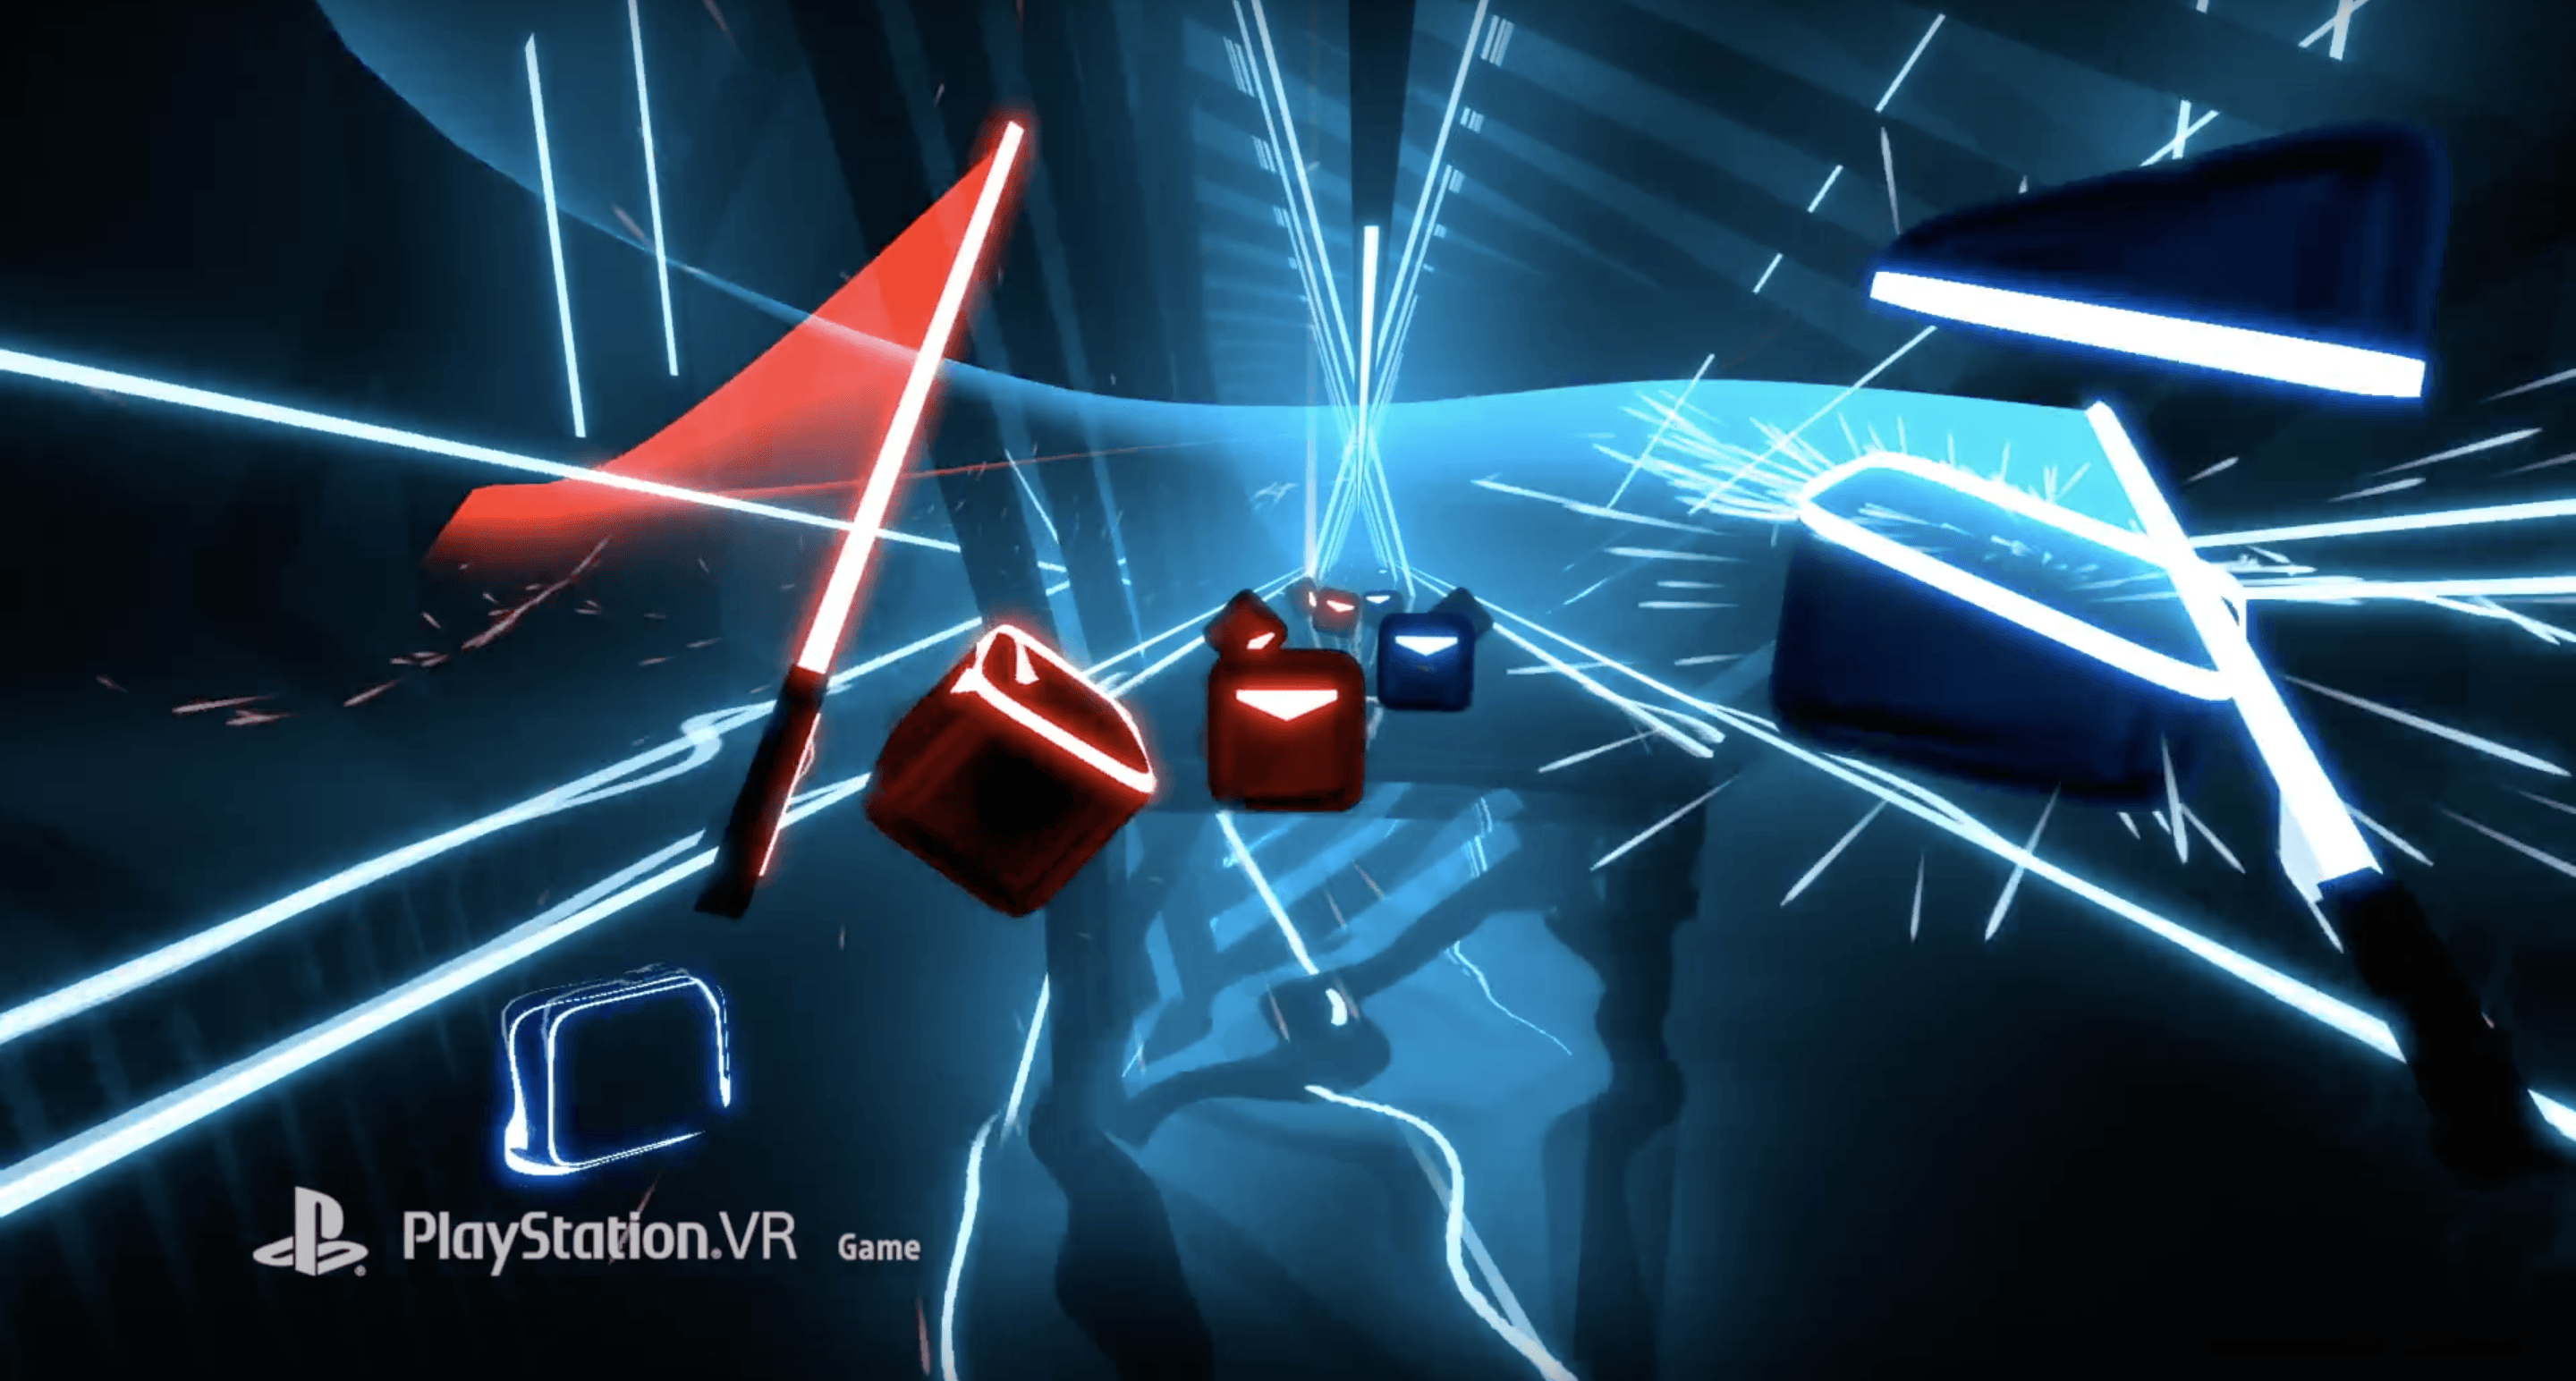 beat-saber-will-bring-steams-top-rated-game-to-psvr